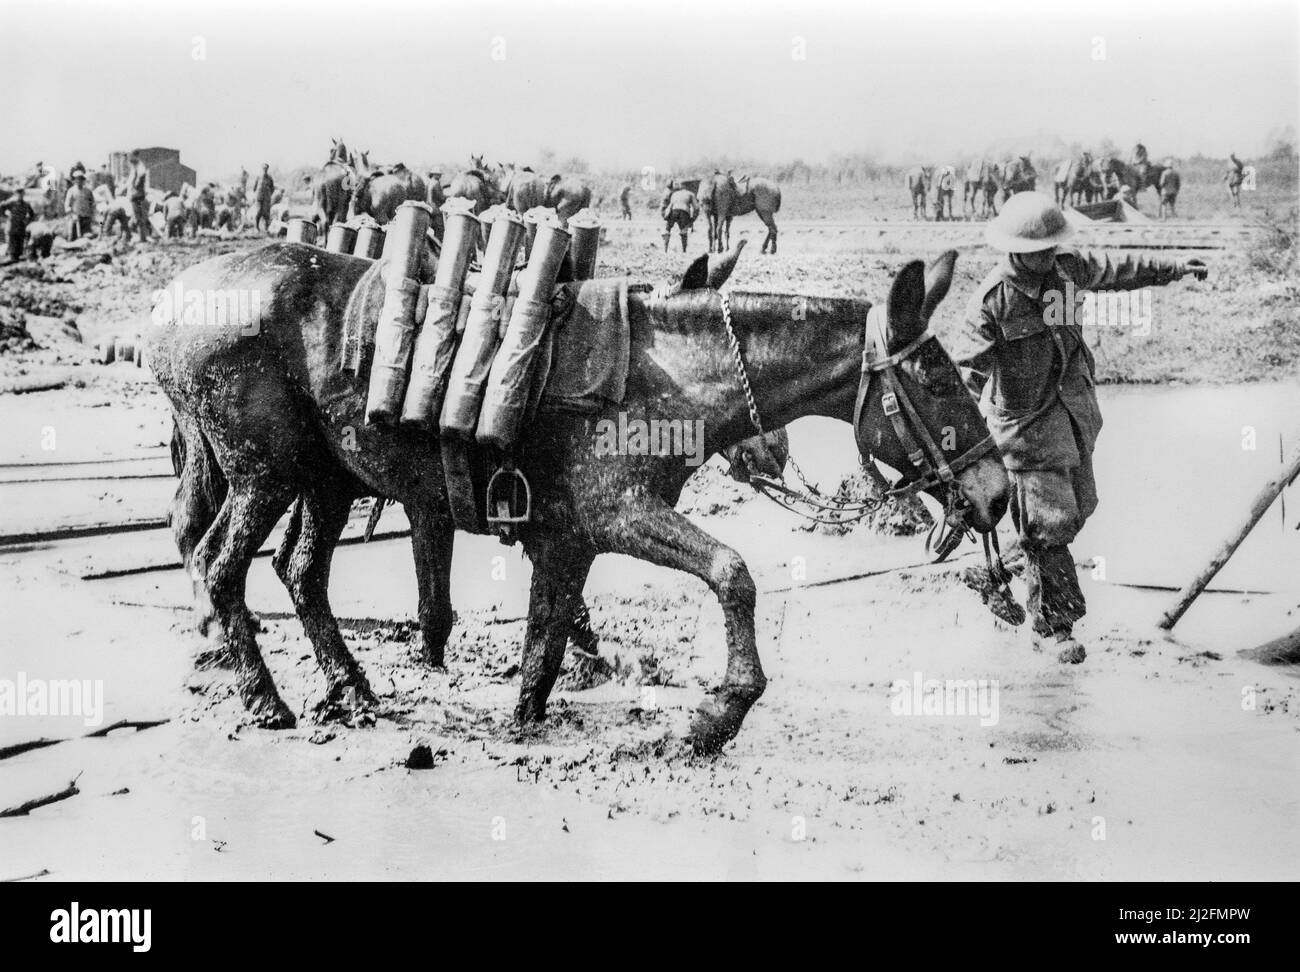 Horses and mules used for transporting WWI artillery shells at the front / battlefield during the First World War One in West Flanders, Belgium Stock Photo